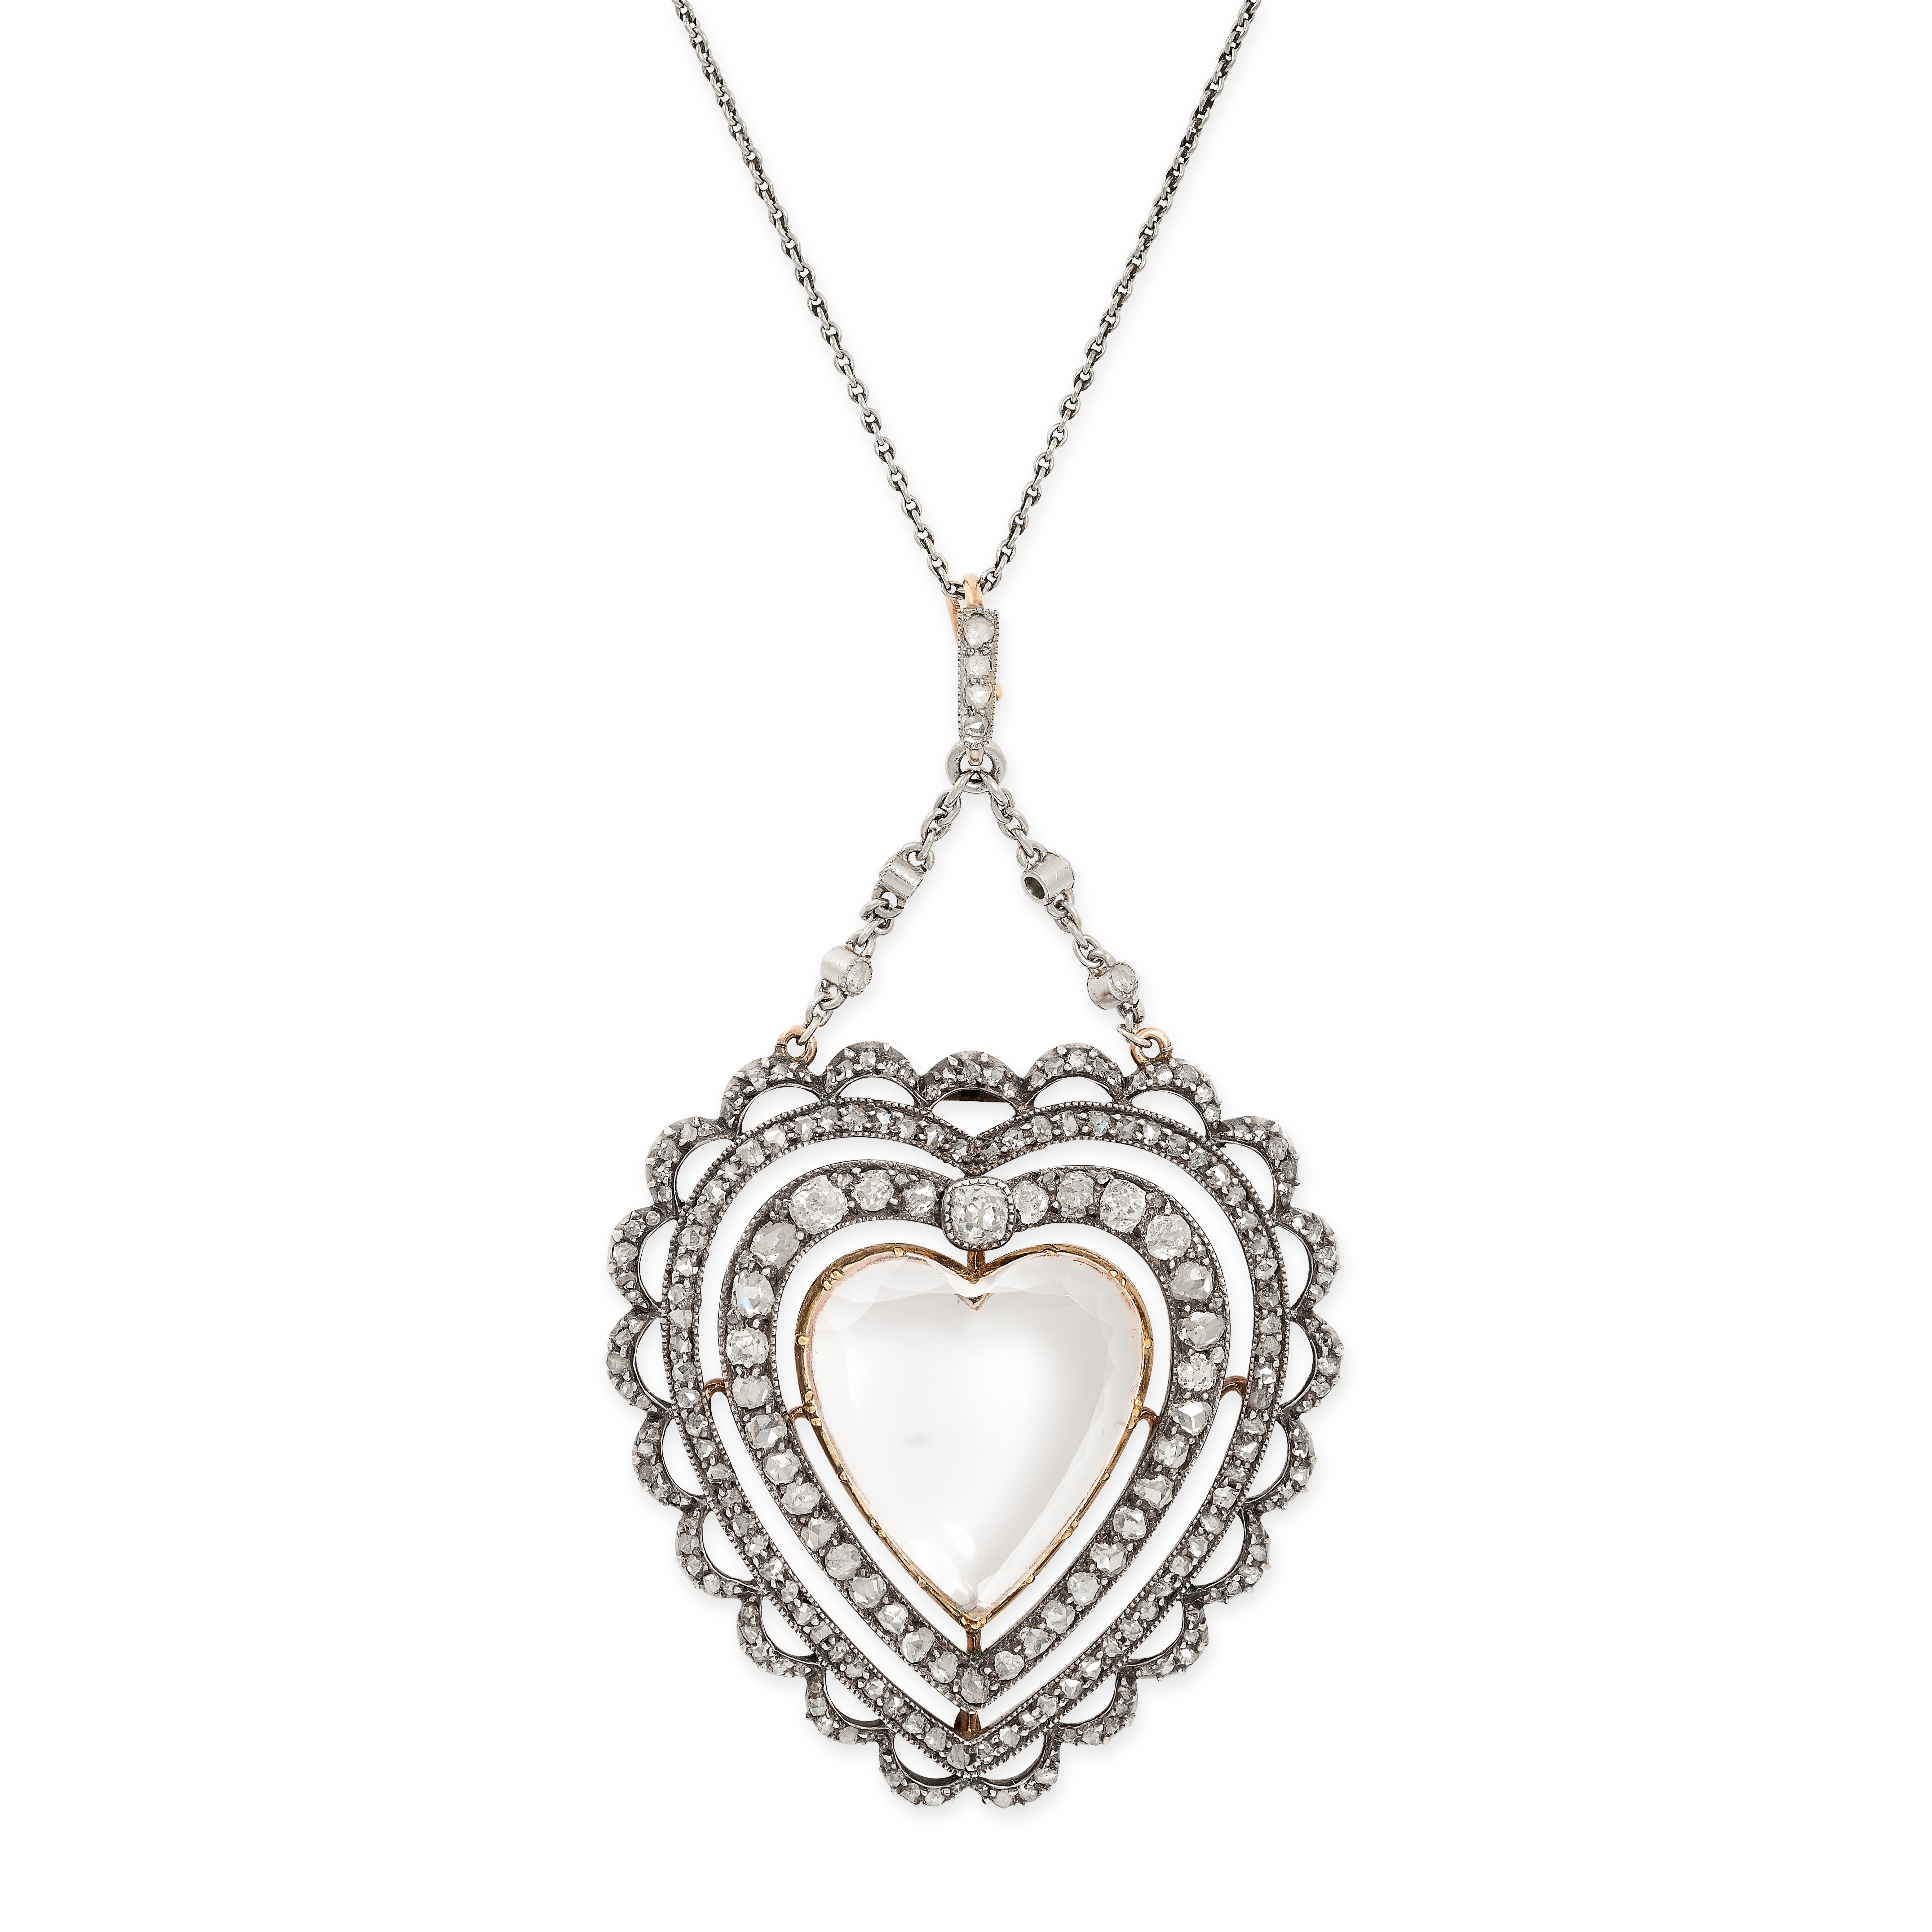 CHILD & CHILD, A FINE ANTIQUE ROCK CRYSTAL AND DIAMOND HEART PENDANT in yellow gold and silver,